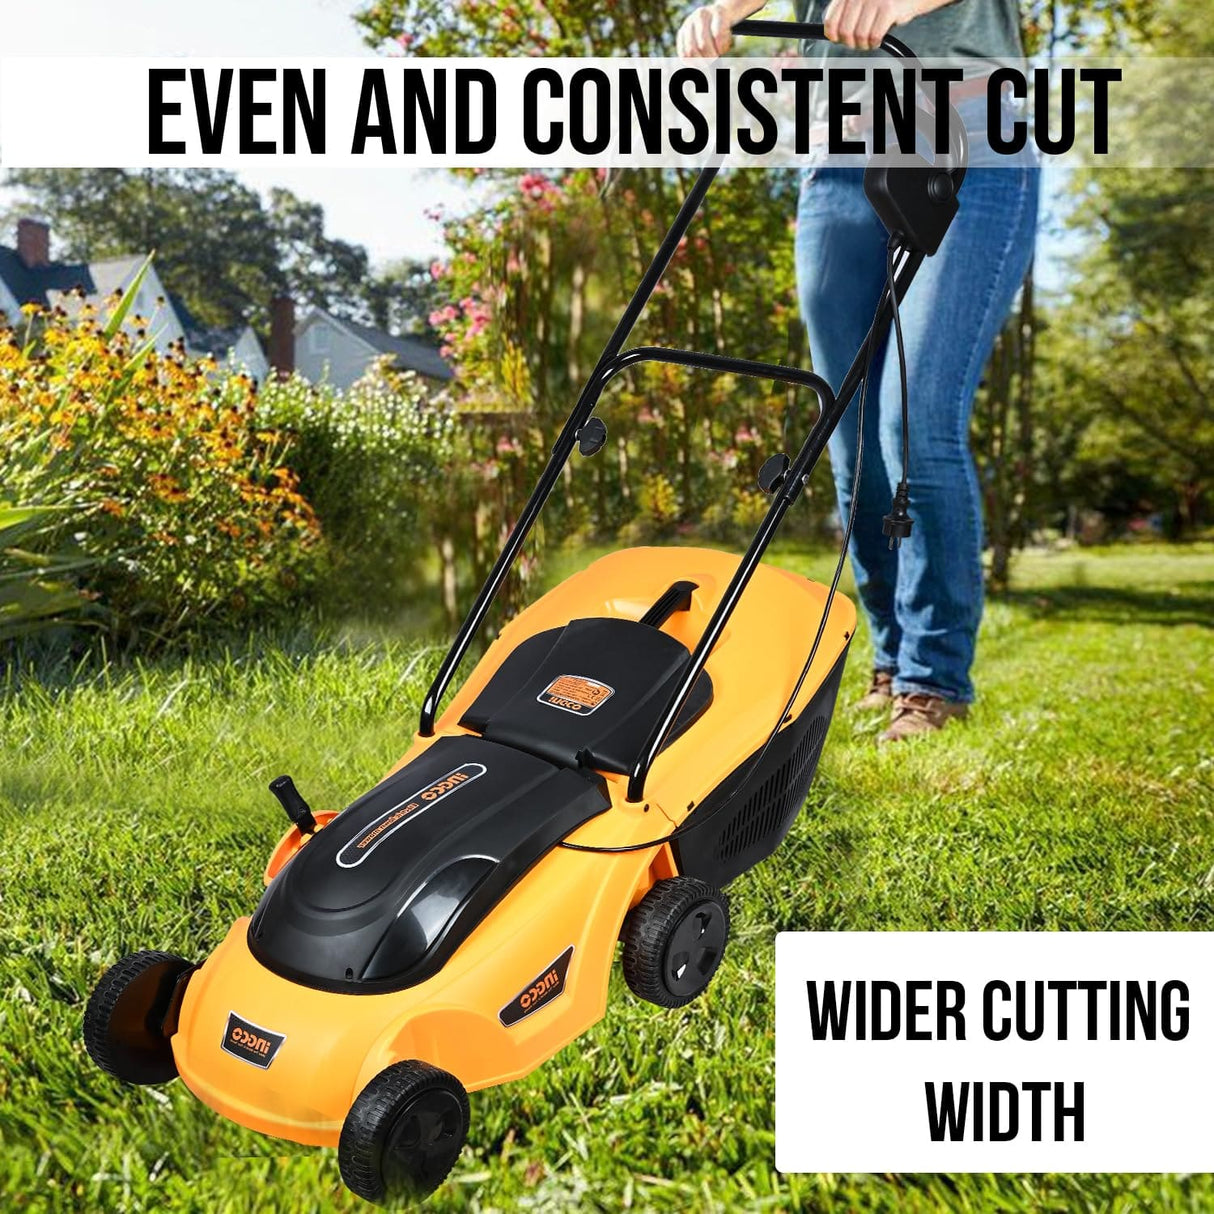 Ingco Industrial Electric Lawn Mower 1600W - LM383 | Shop Online in Accra, Ghana - Supply Master Lawn Mower Buy Tools hardware Building materials